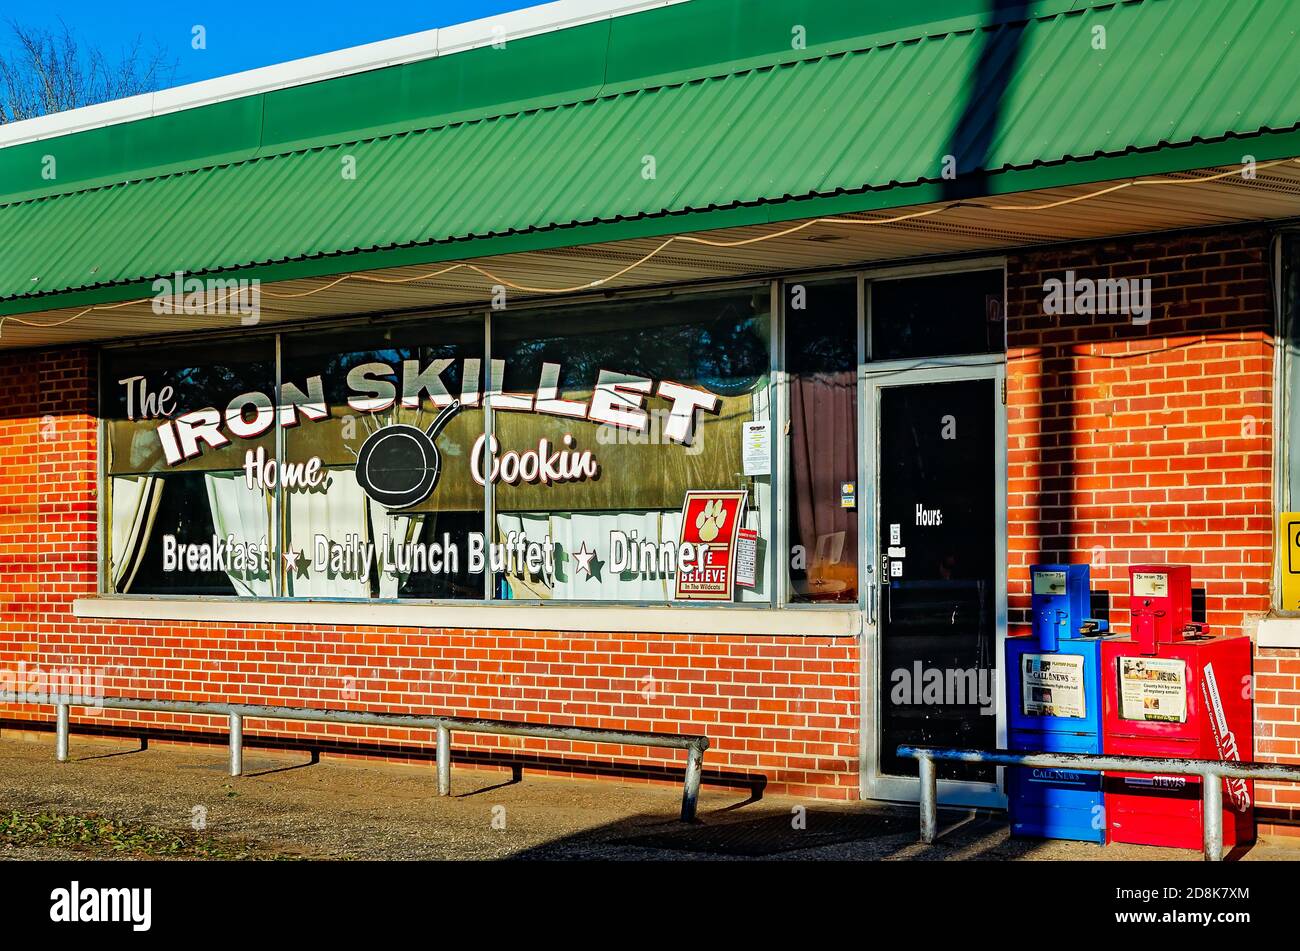 The Iron Skillet restaurant is pictured, Oct. 29, 2020, in Citronelle, Alabama. The restaurant specializes in Southern cooking. Stock Photo